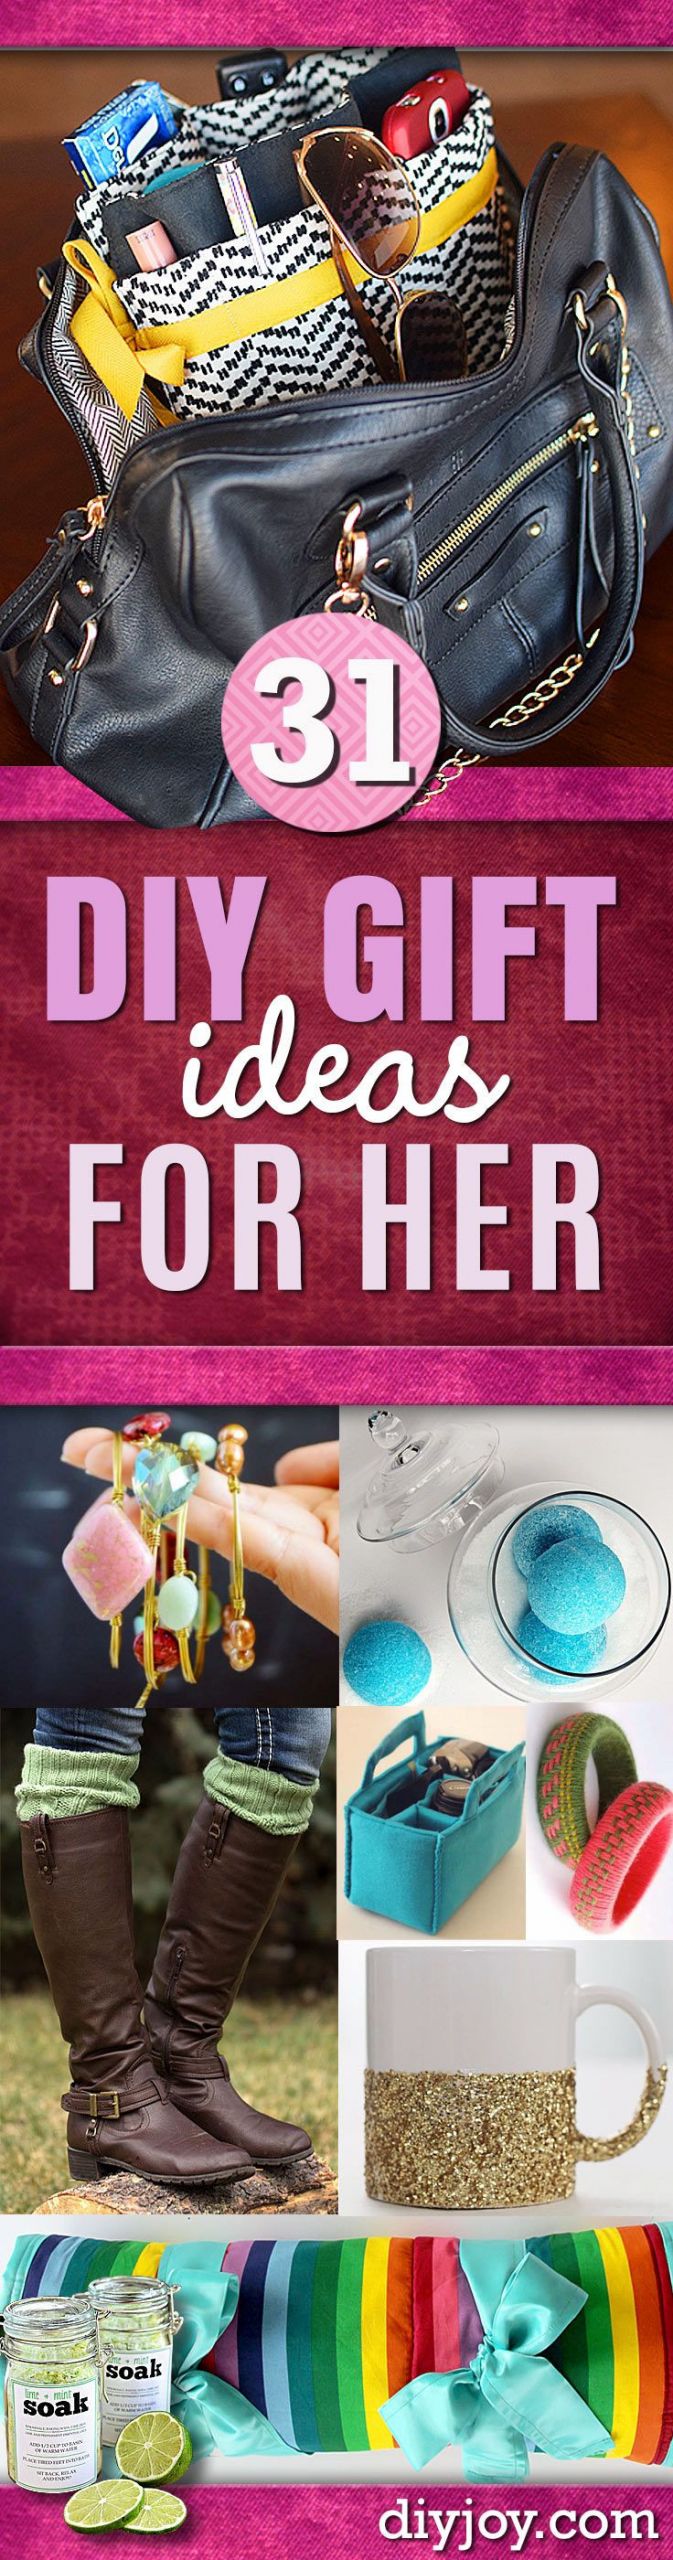 Holiday Gift Ideas For Girlfriend
 DIY Gift Ideas for Her